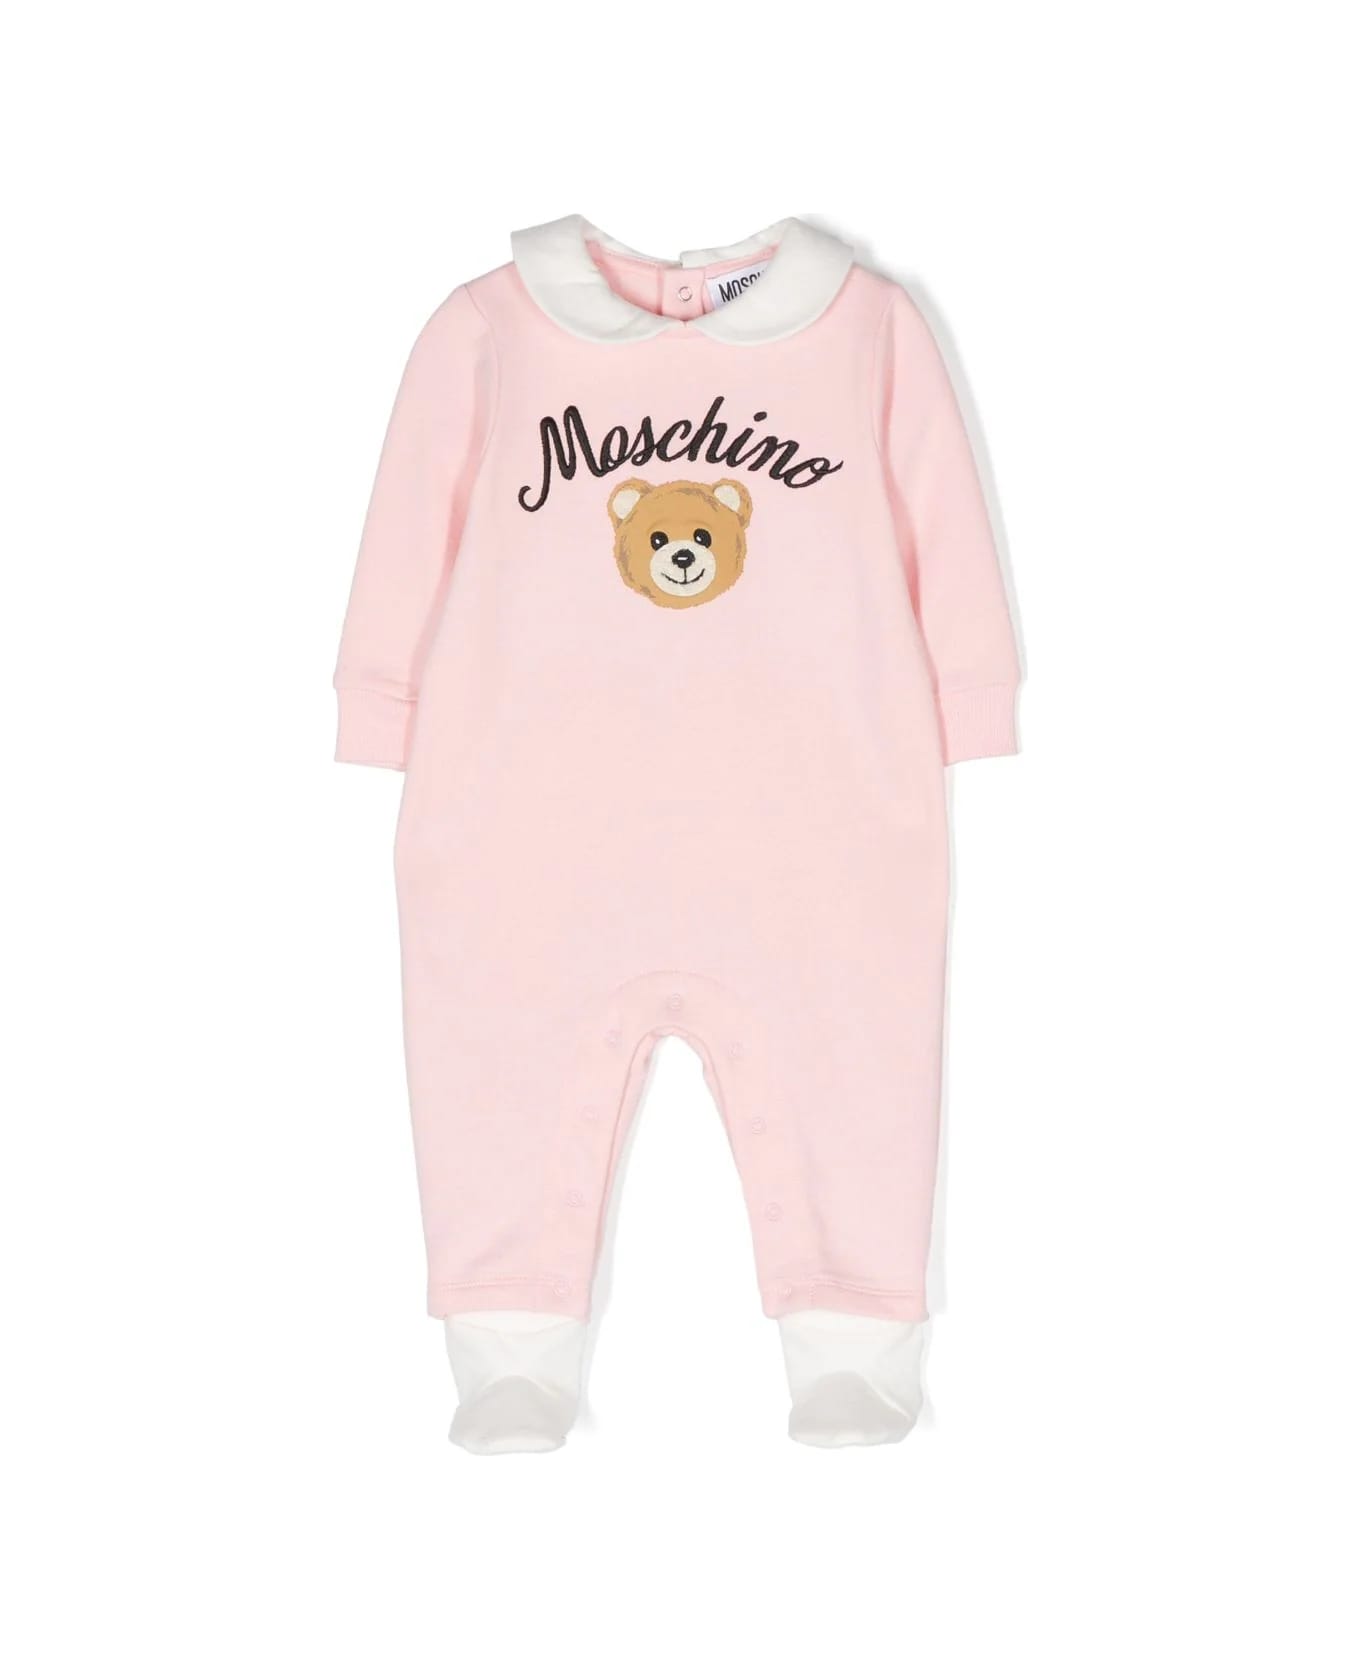 Moschino Onesie With Print - Pink